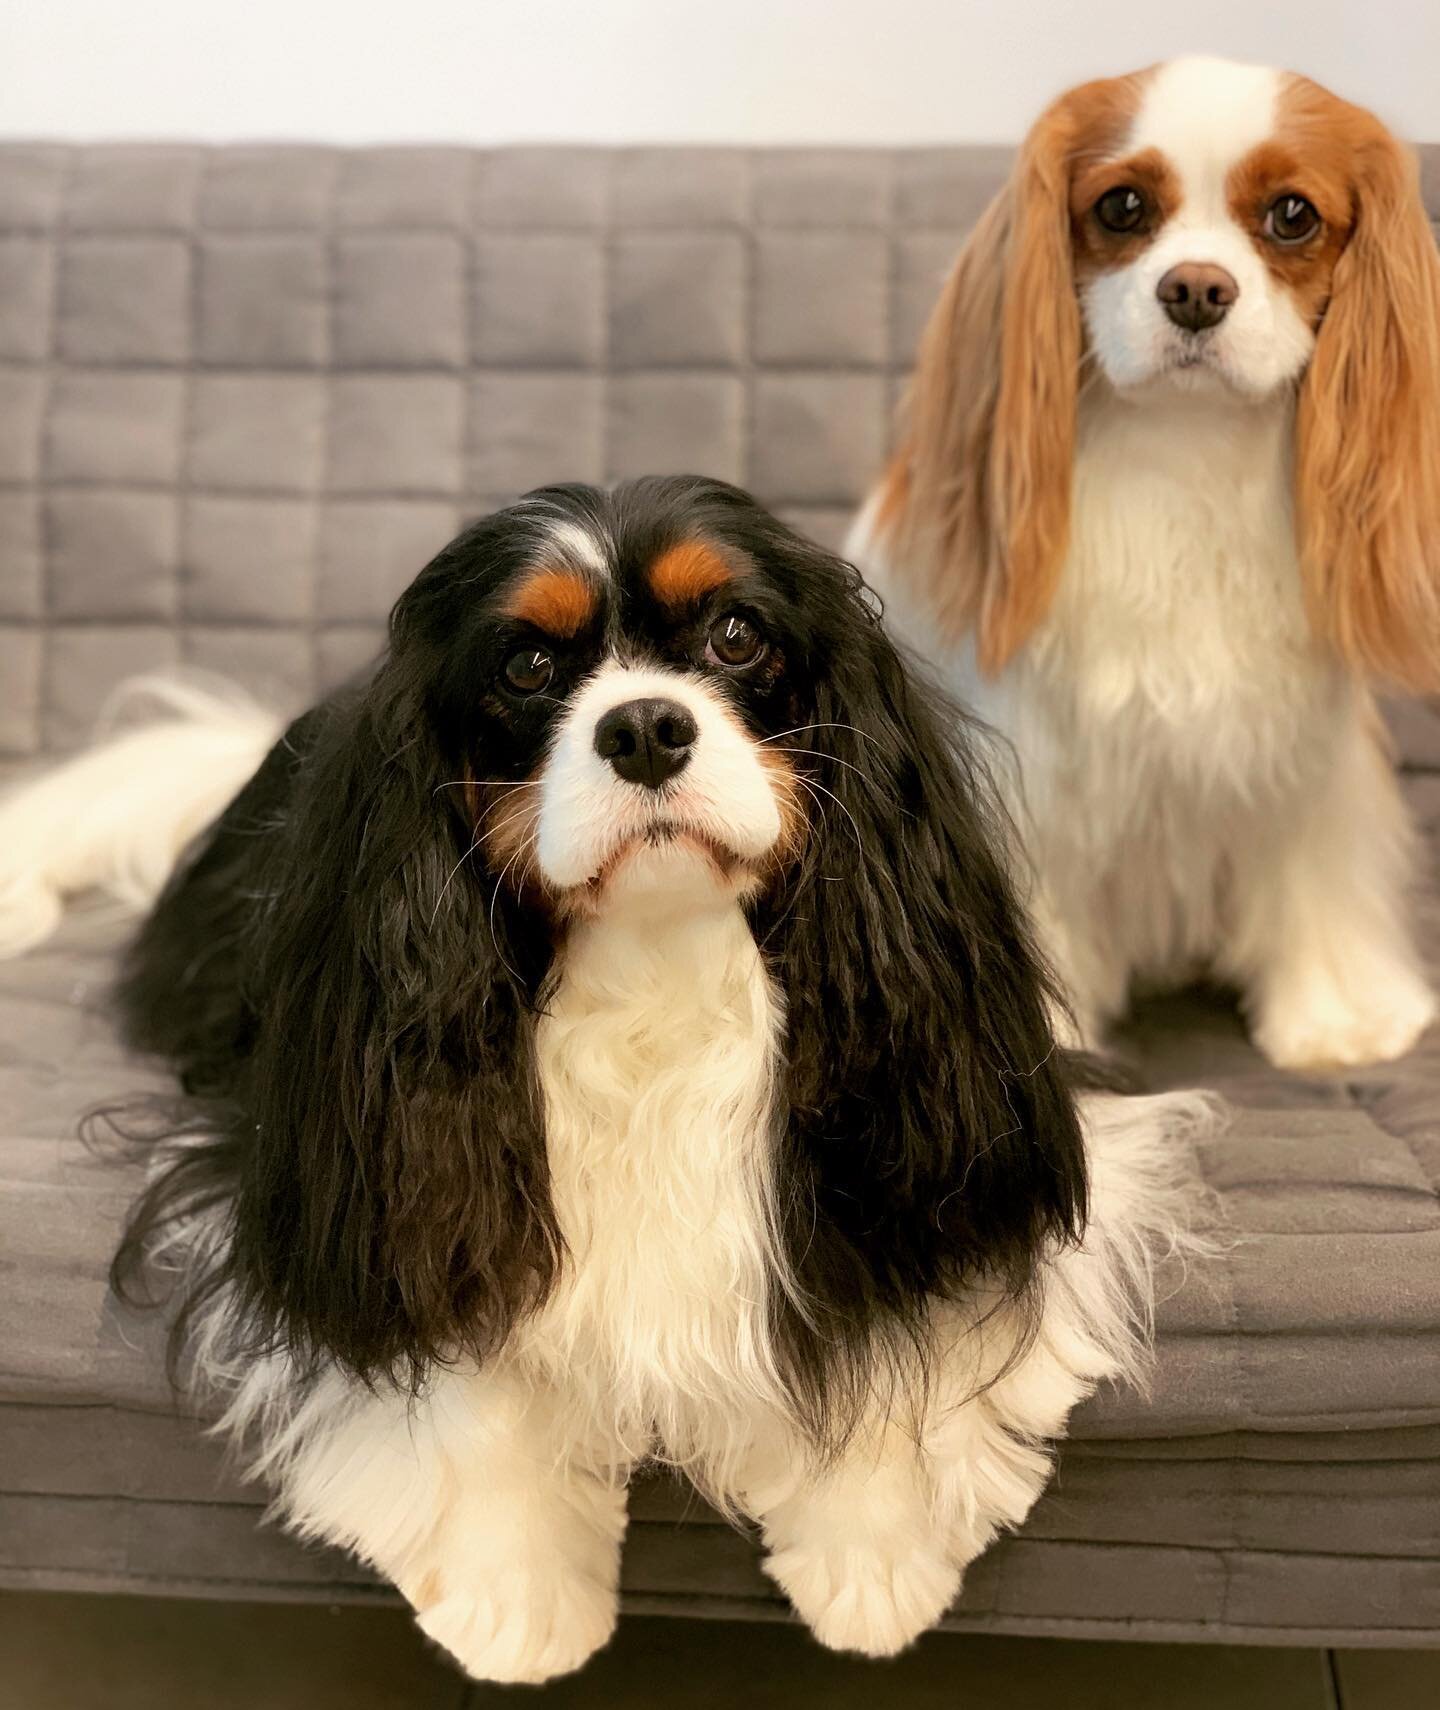 Oliver and Lola came for a freshen up today #cavaliers #oneofmyfavoritebreeds #experientialspaw #barkandbrush #dogsofoakville #cavaliersofistagram #ilovemississauga #beautifuldogs #freshenup #squeekyclean #bathandtidy #ilovemyclients